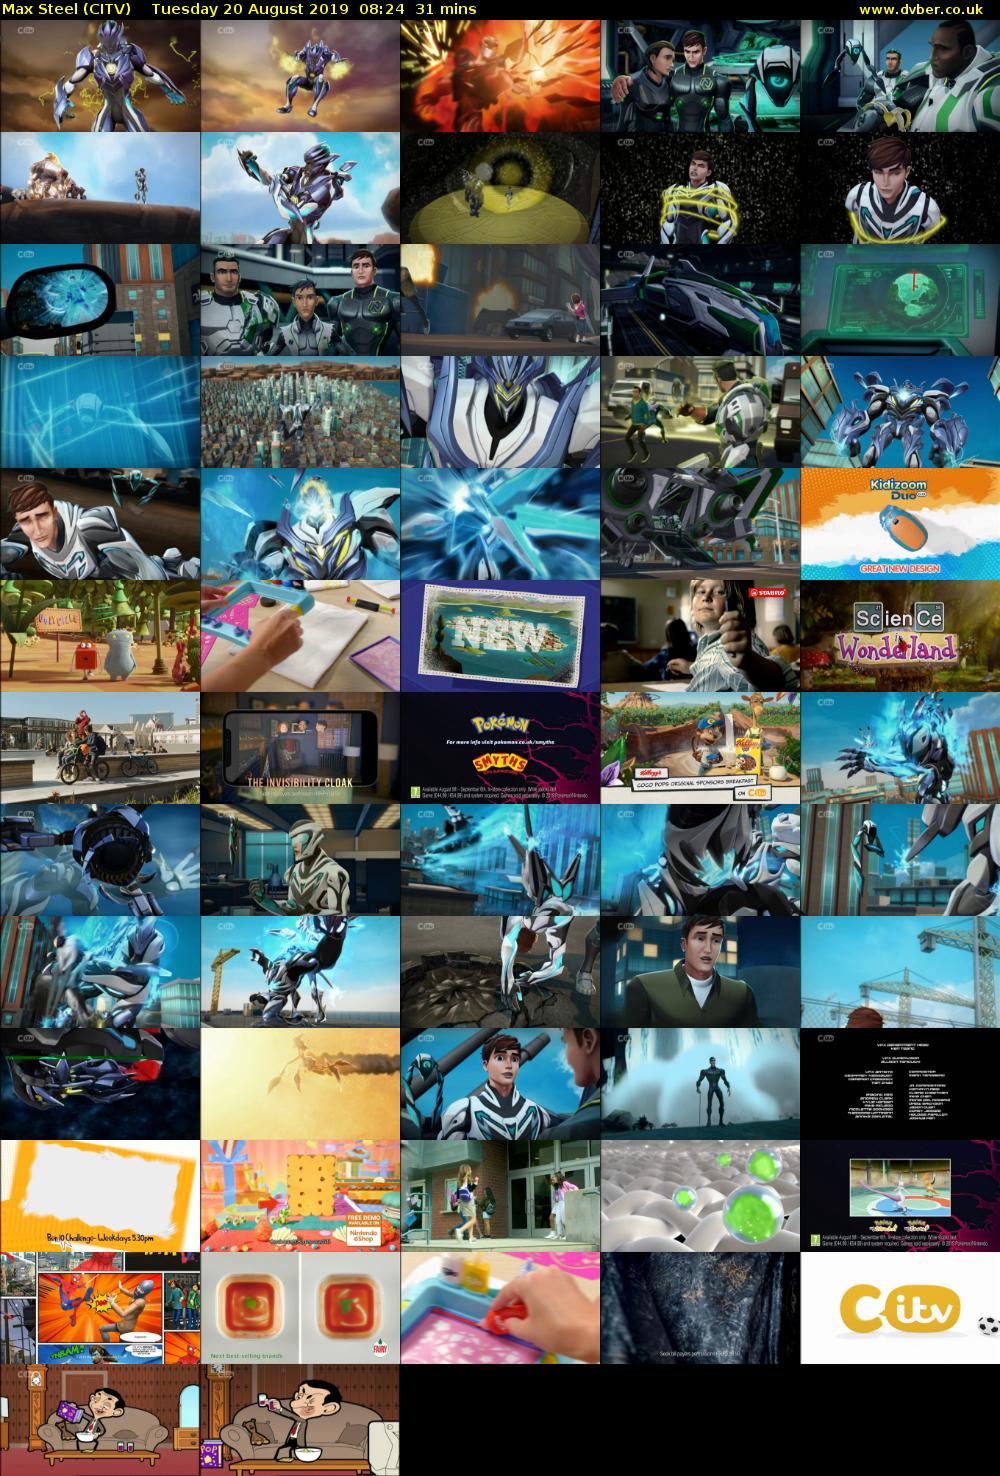 Max Steel (CITV) Tuesday 20 August 2019 08:24 - 08:55